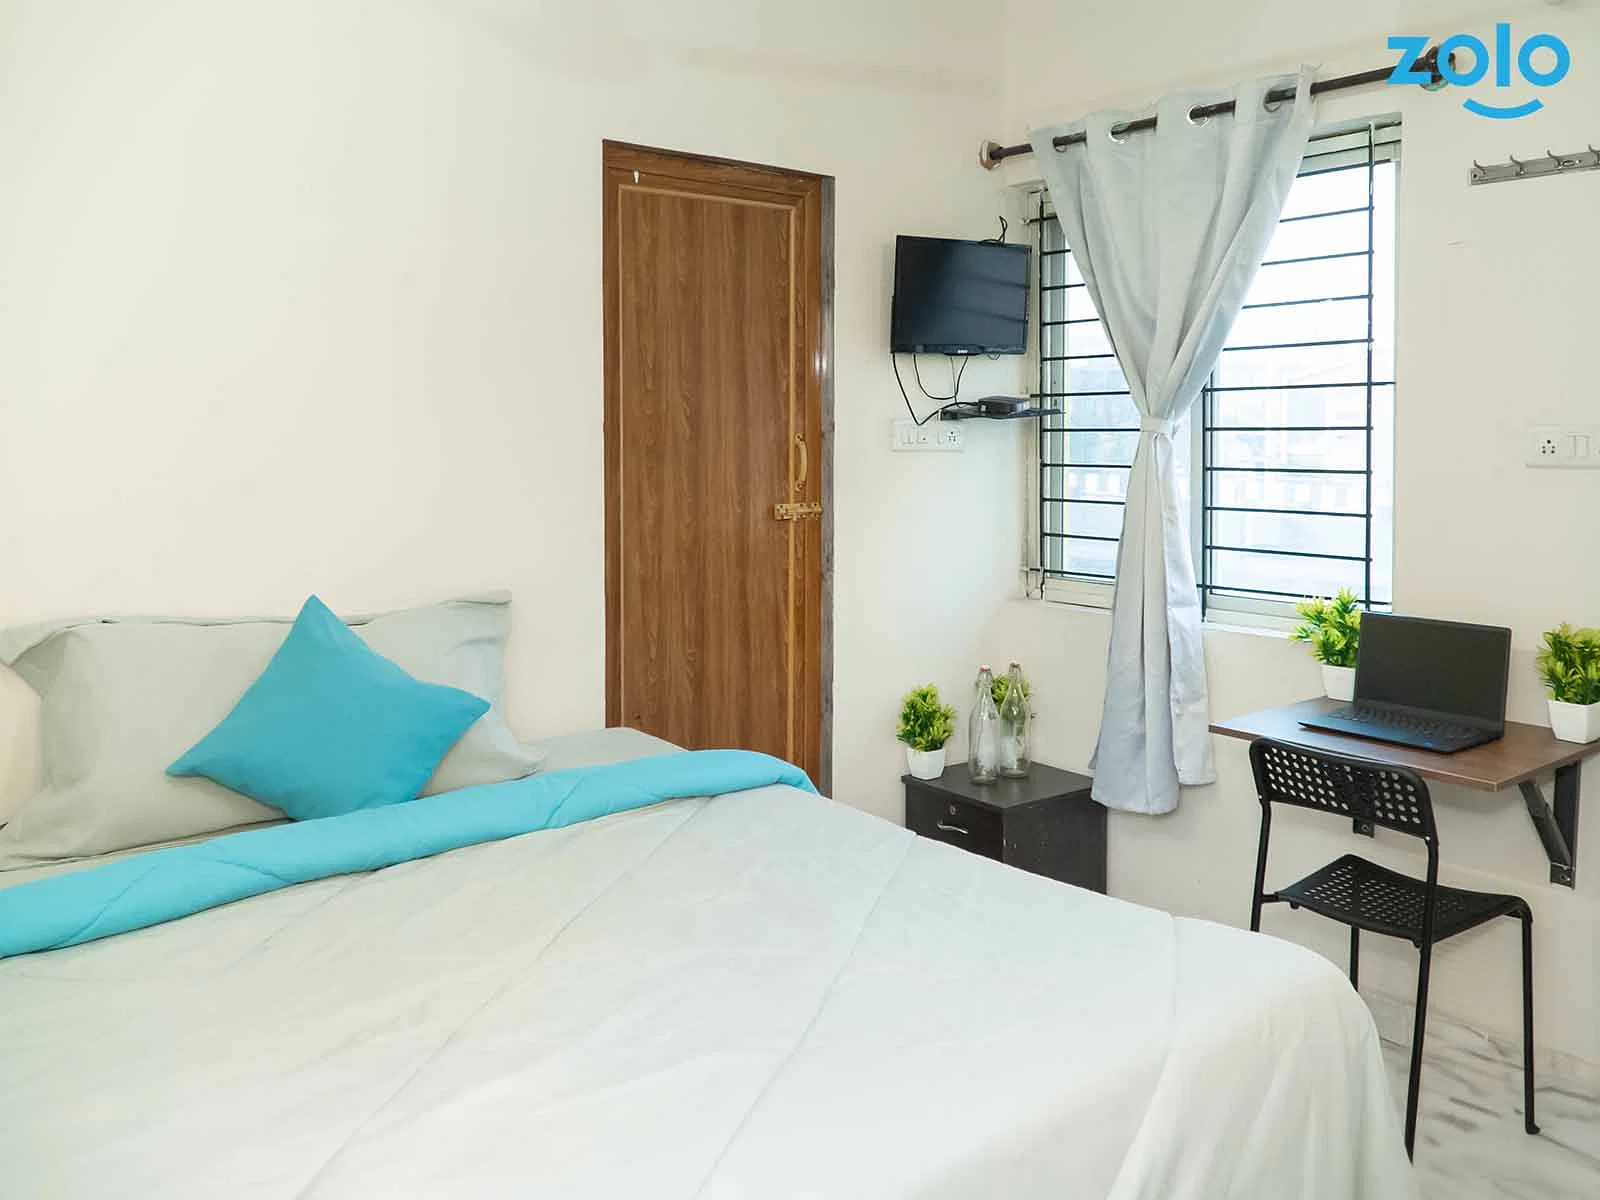 best Coliving rooms with high-speed Wi-Fi, shared kitchens, and laundry facilities-Zolo Sphere